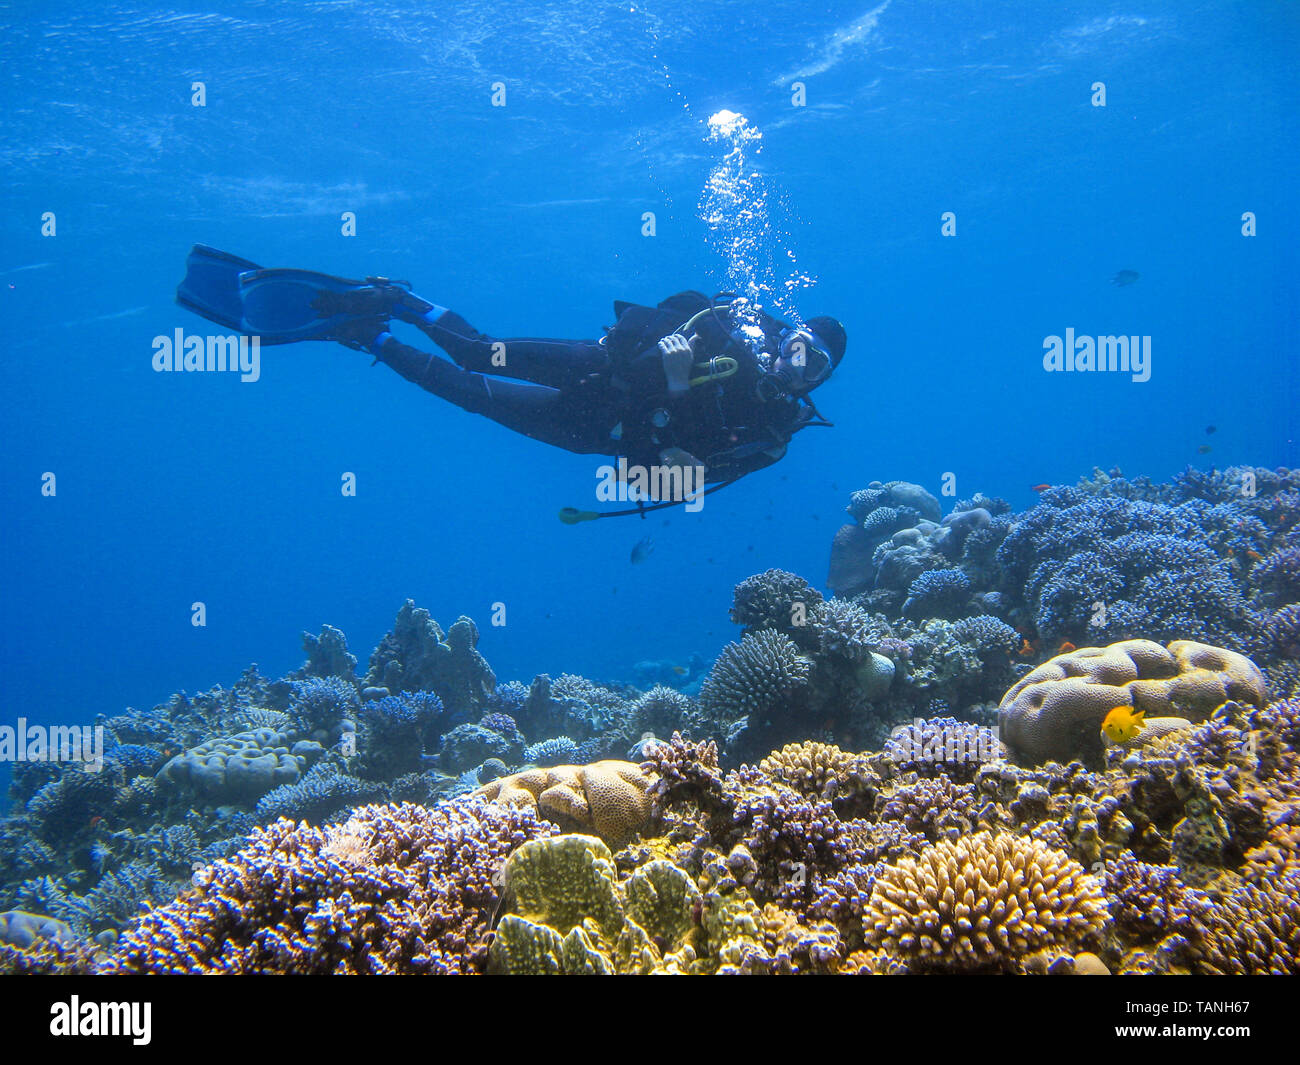 Underwater photography of a scuba diver swimming above the coral reef at dive site Ras Abu Galum in Dahab, Egypt. Stock Photo